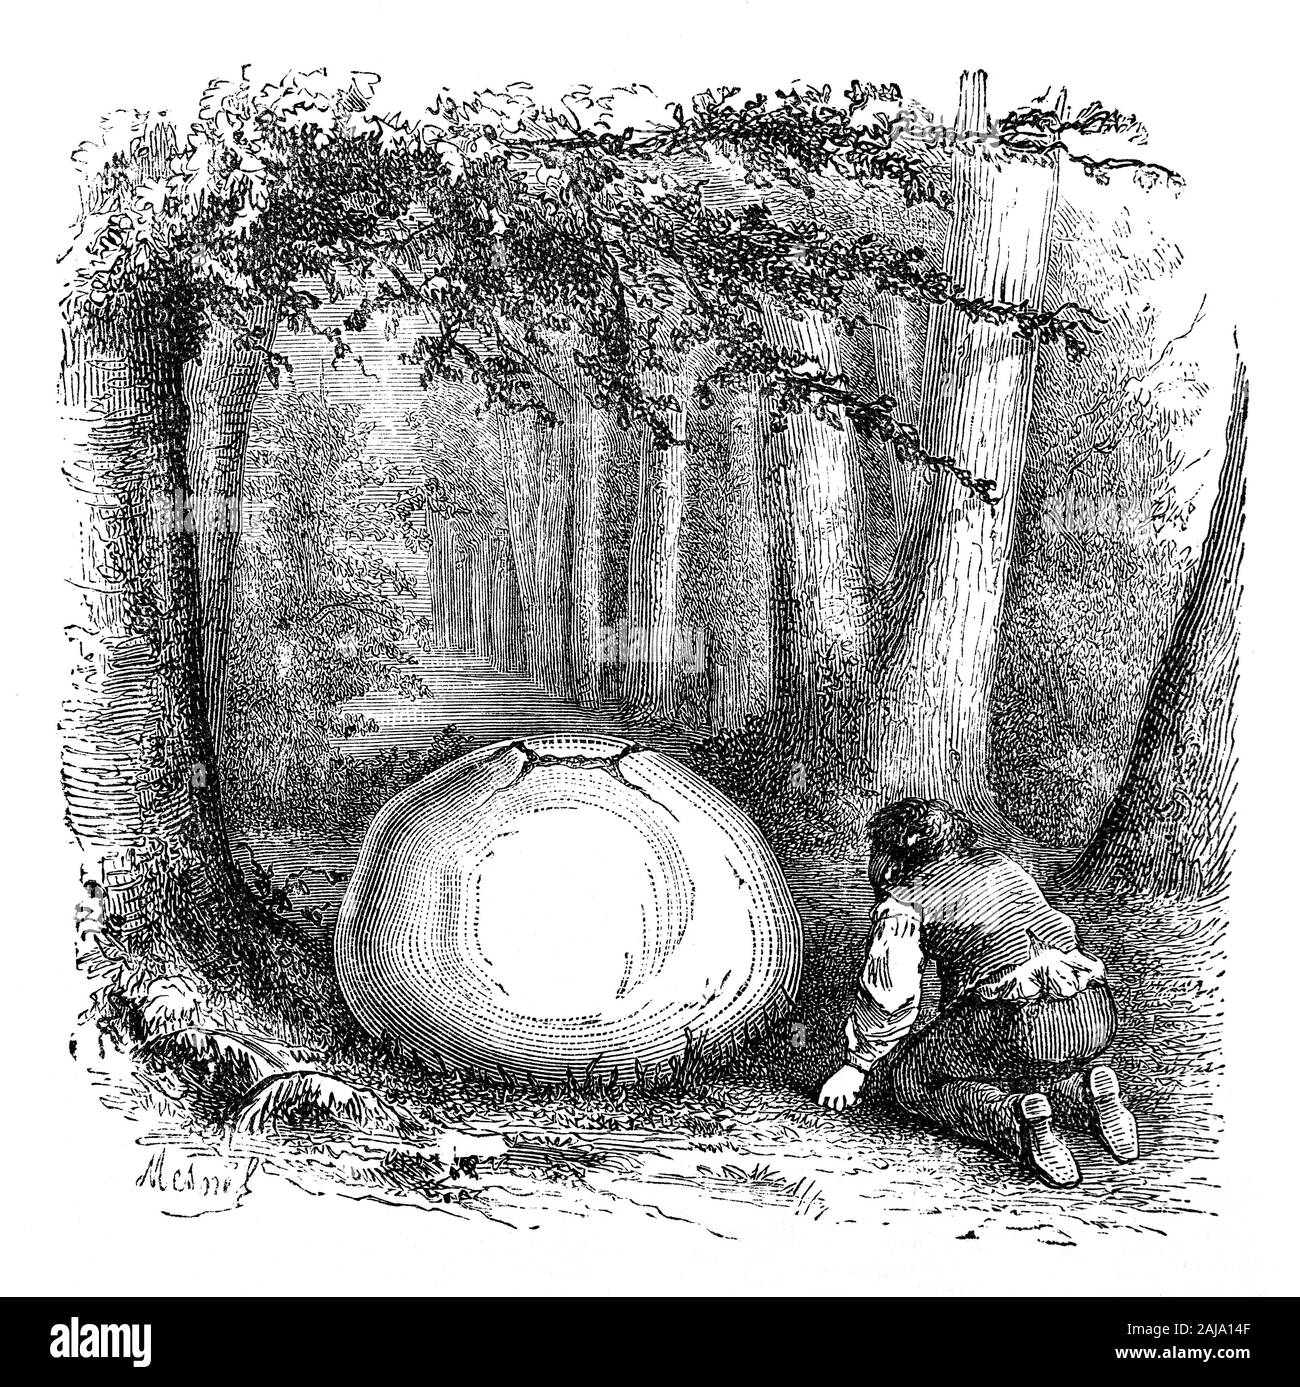 A countryman examining a Giant Puffball (Calvatia gigantea - earlier classified as Lycoperdon giganteum). Puffballs are fungi, so named because clouds of brown dust-like spores are emitted when the mature fruitbody bursts or is impacted. It can reach a foot (30 cm) or more in diameter, and is difficult to mistake for any other fungus. It has been estimated that a large specimen of this fungus when mature will produce around 7 × 10¹² spores. If collected before spores have formed, while the flesh is still white, it may be cooked as slices fried in butter, with a strong earthy, mushroom flavor. Stock Photo